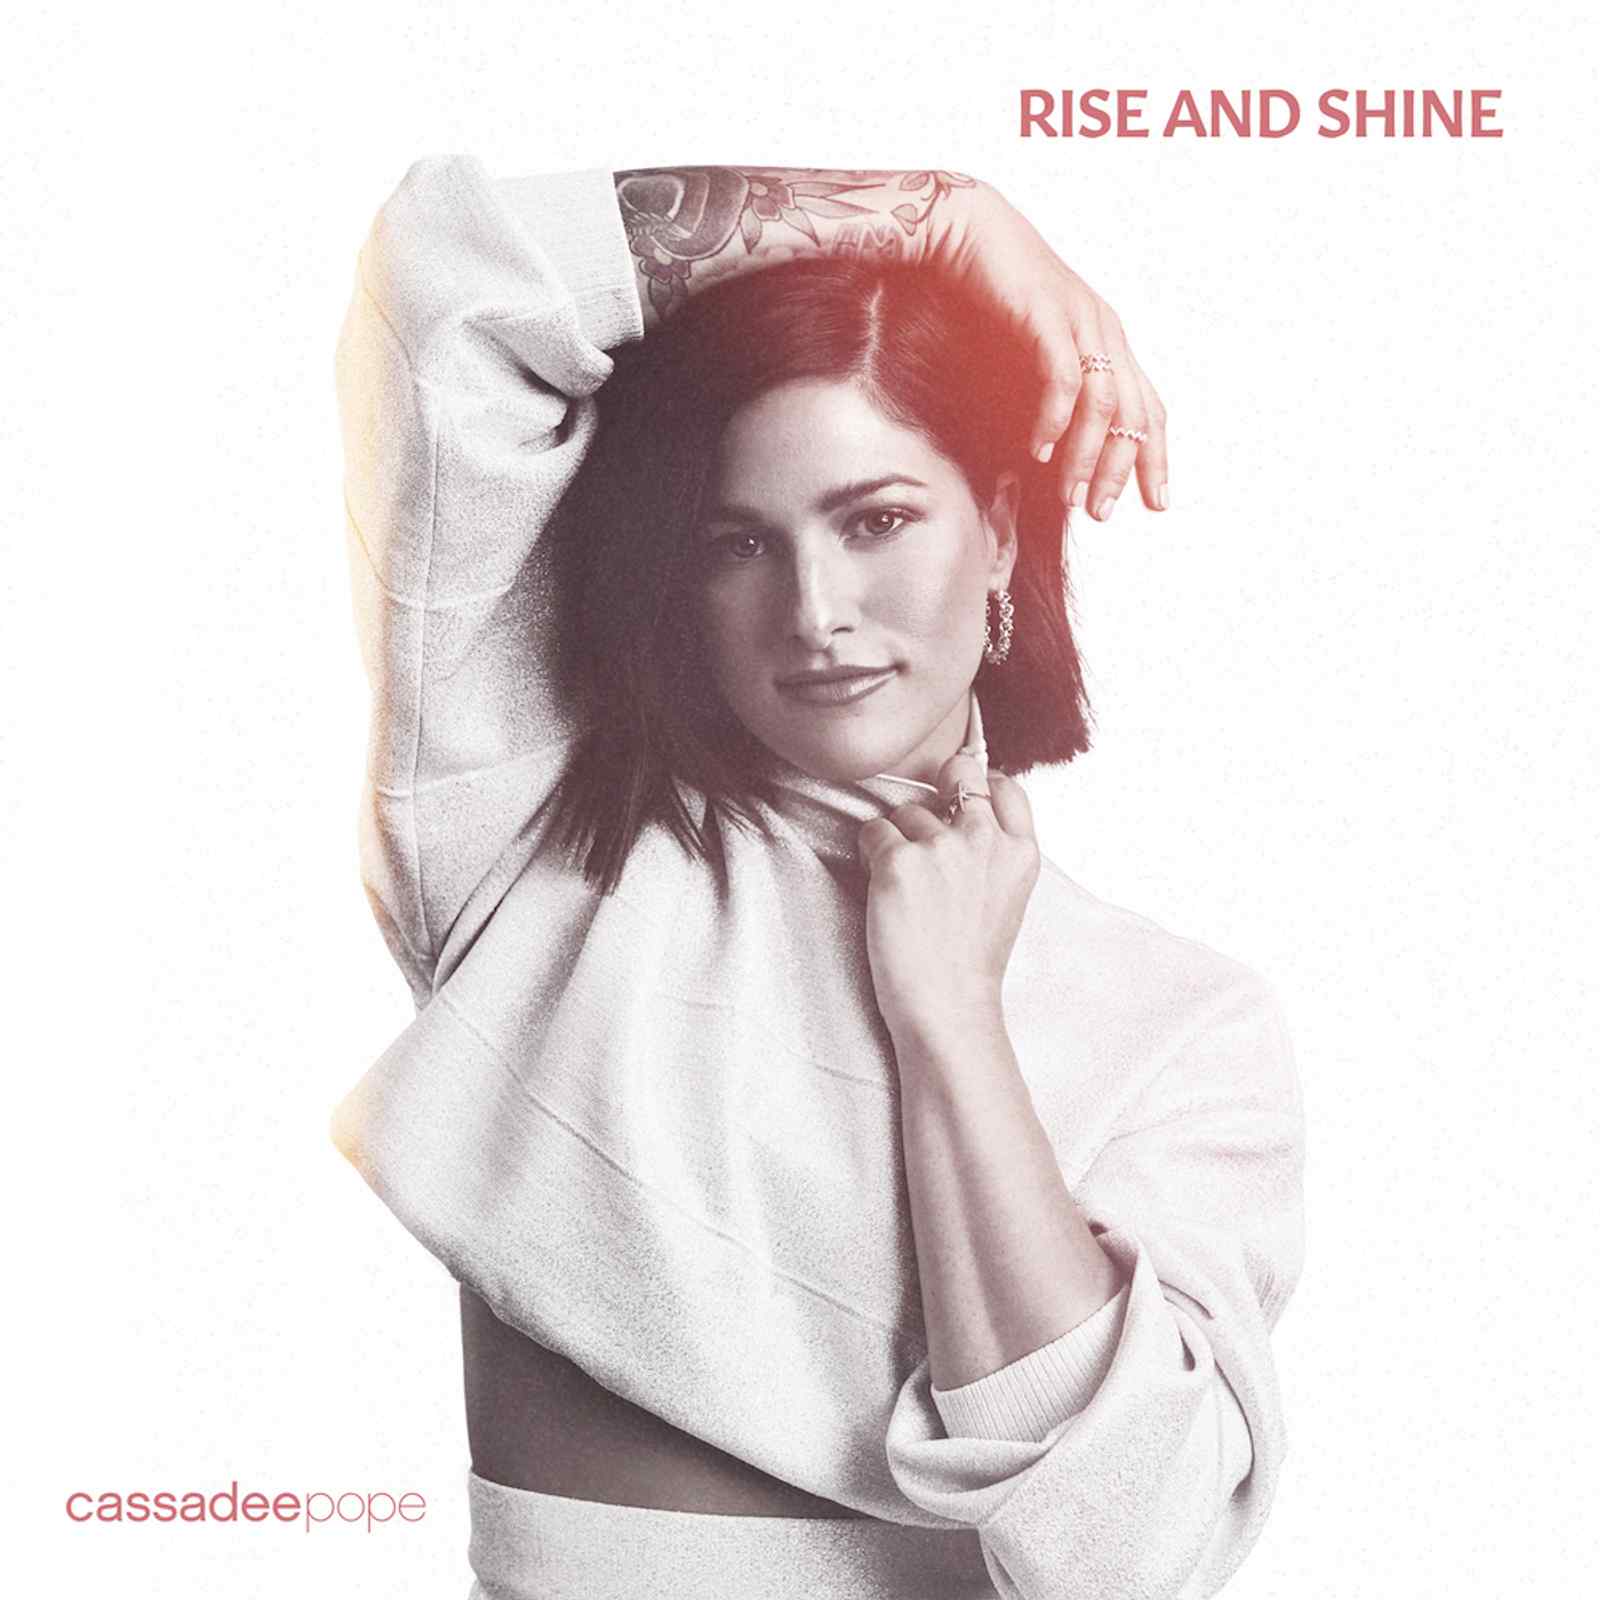 Album Release: Rise And Shine by Cassadee Pope